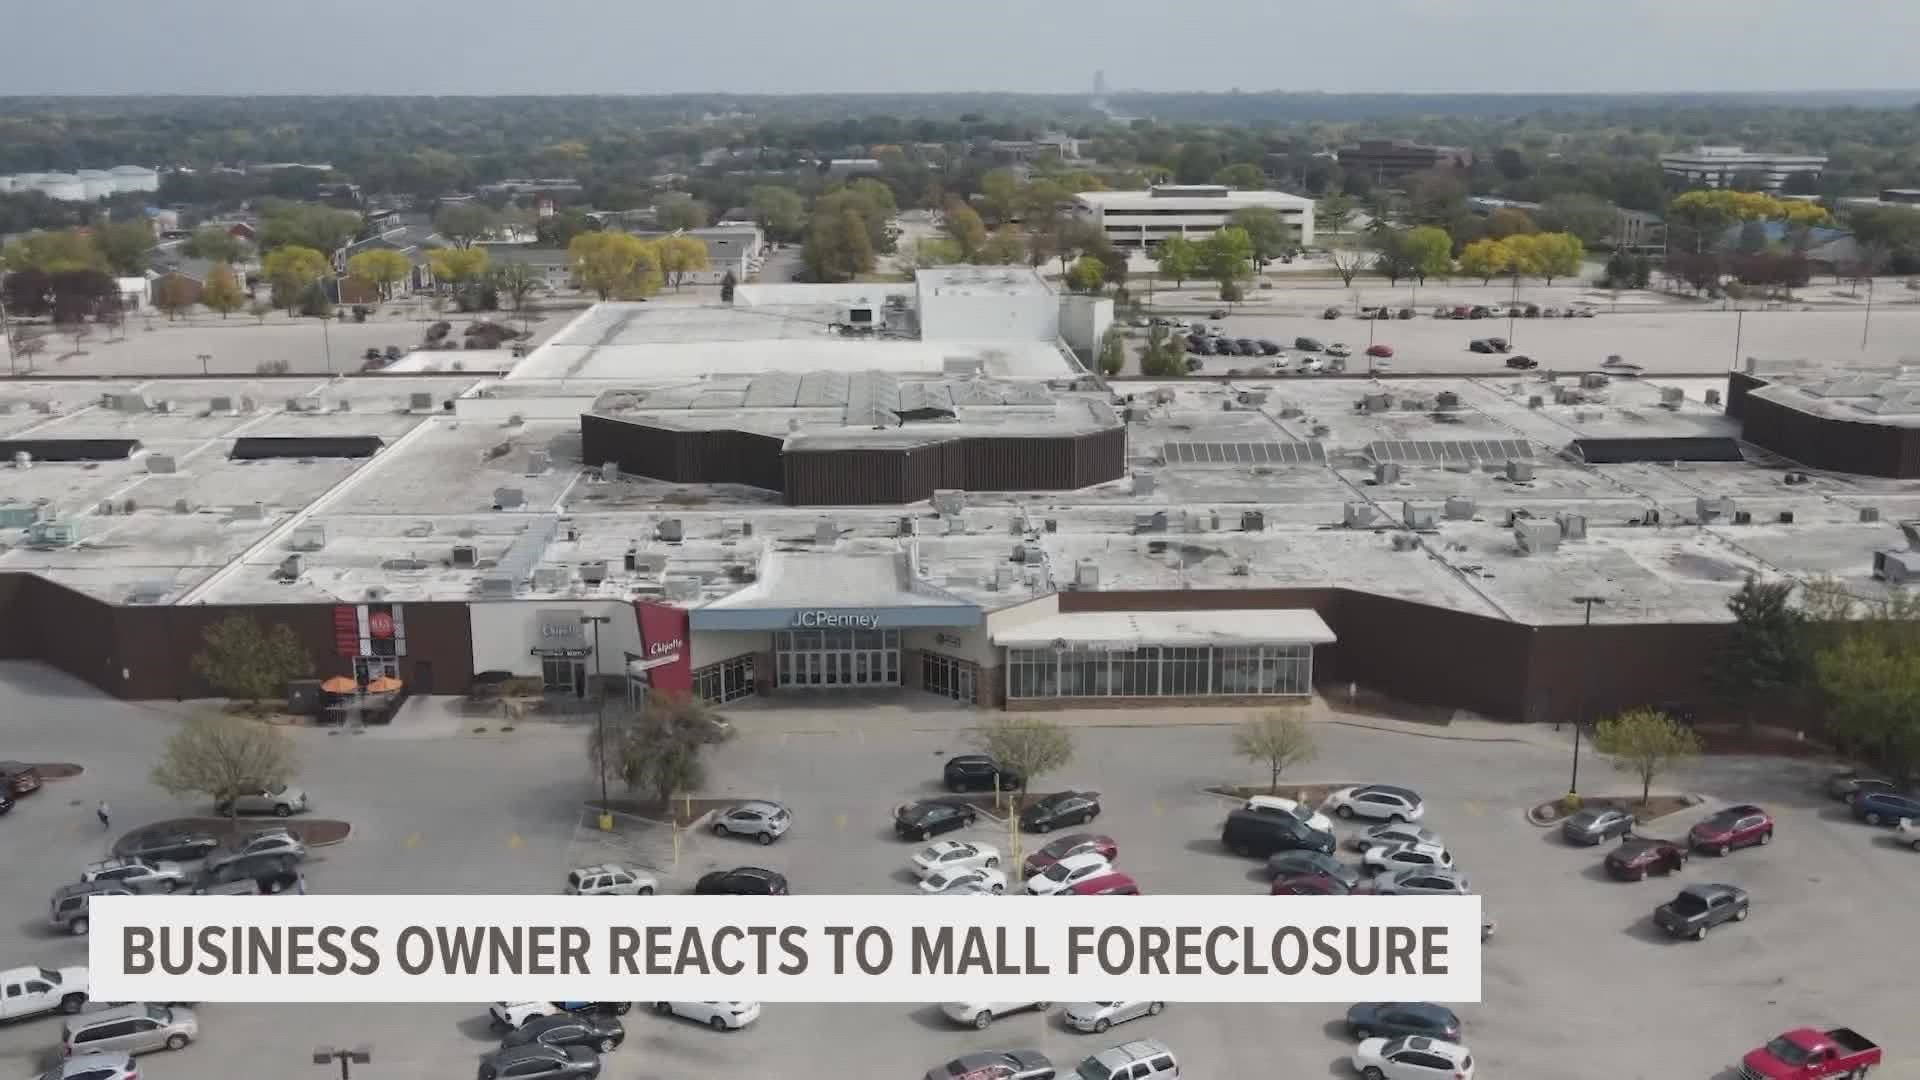 Valley West Mall owes $42 million to lenders as of May 2022, according to court documents.